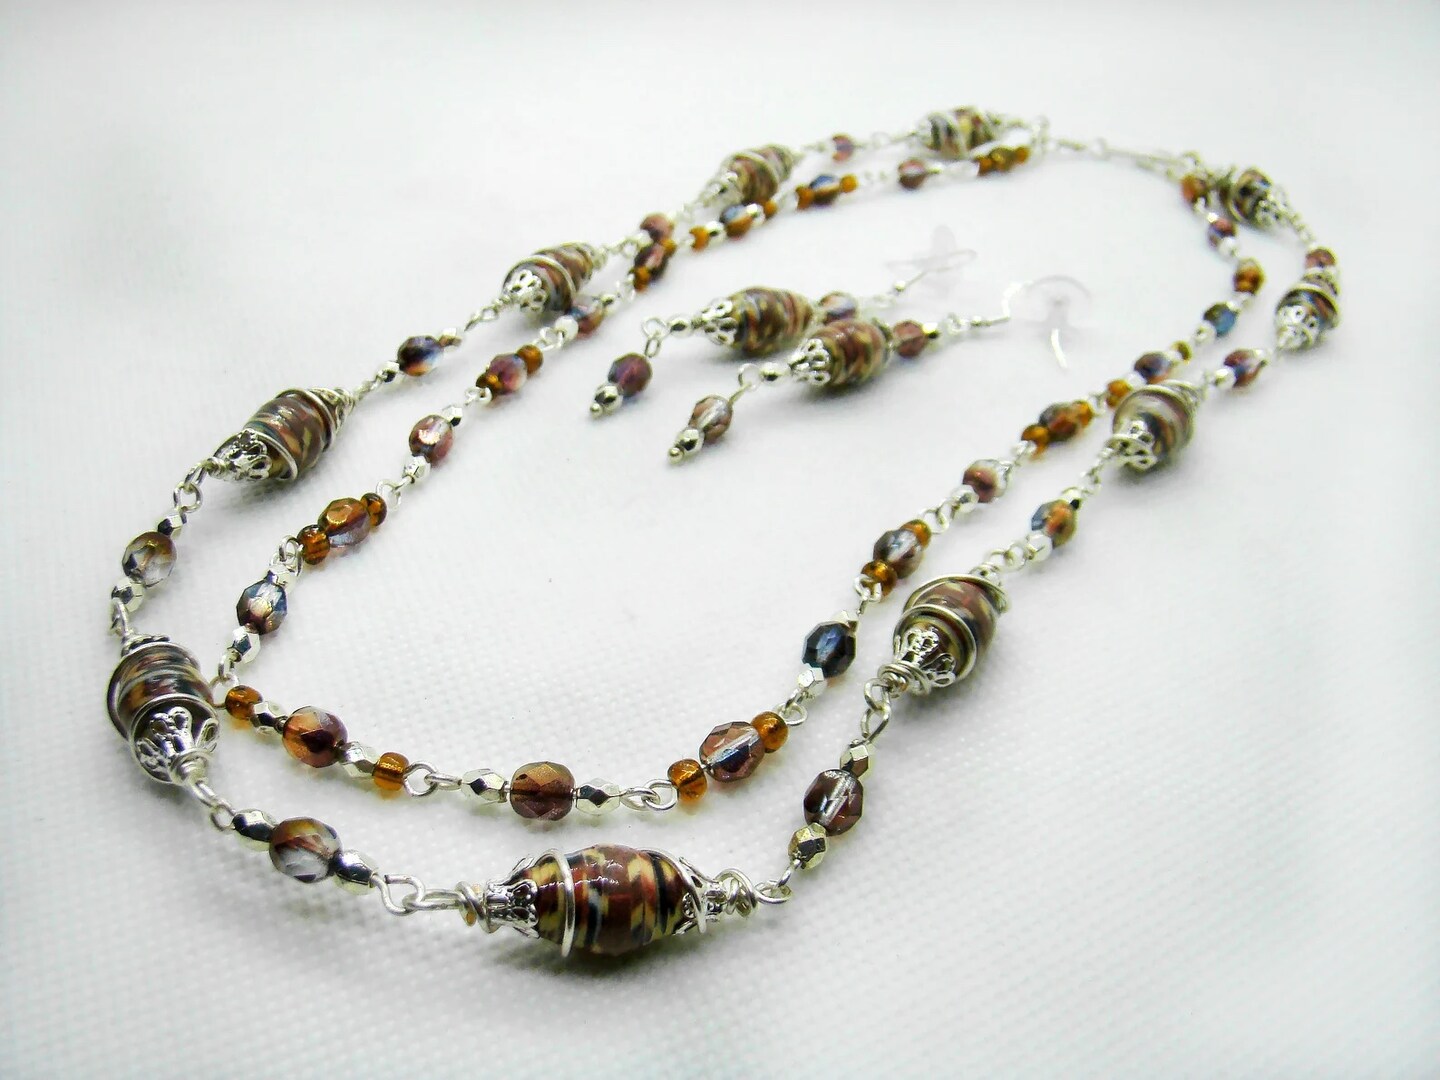 How To Make A Wire Wrapped Bead Chain